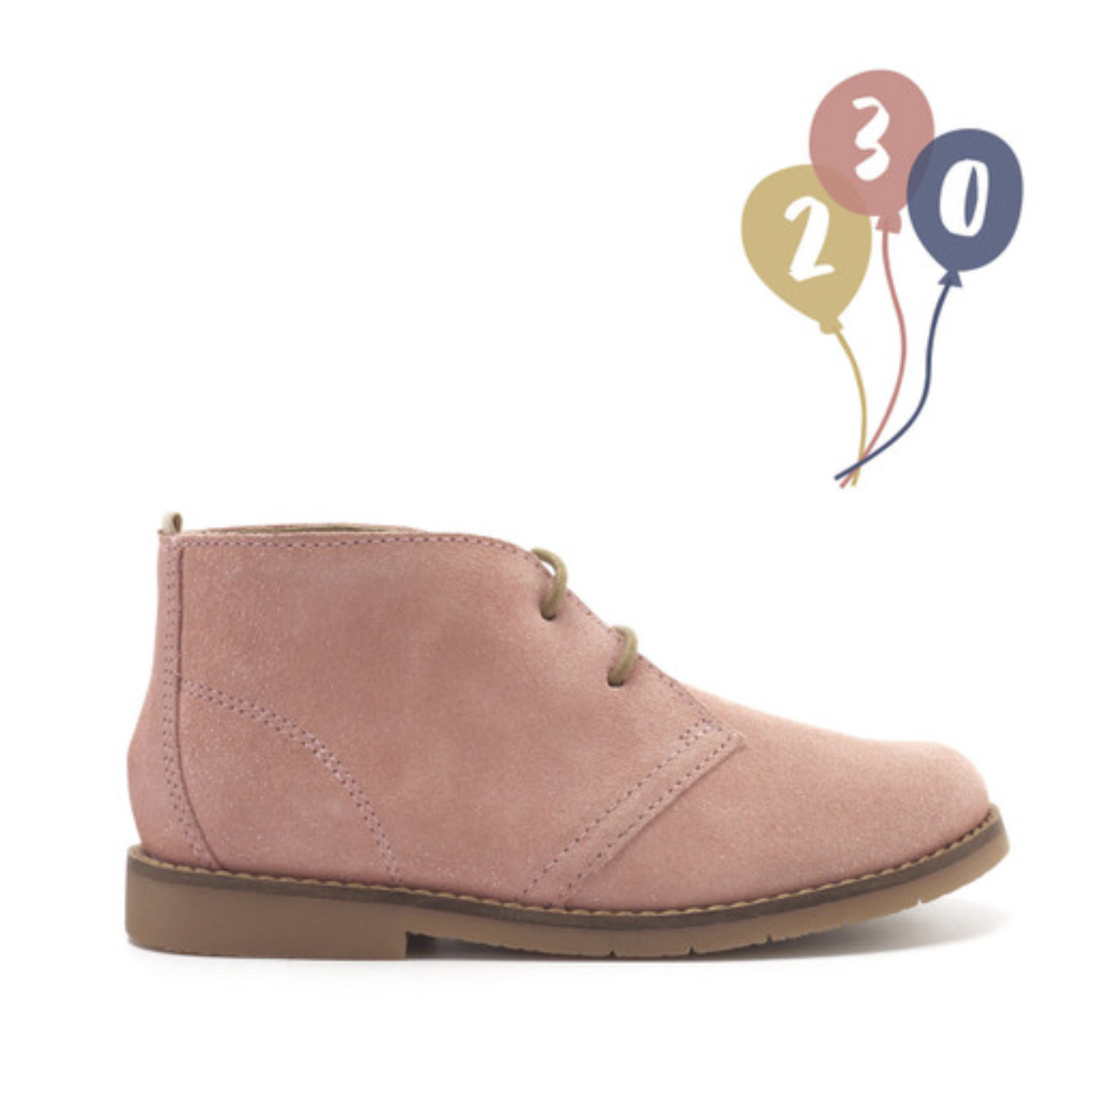 A girls desert boot by Start-Rite, style Autumn, in dusky pink glitter with light brown laces and soles. Right side view. 